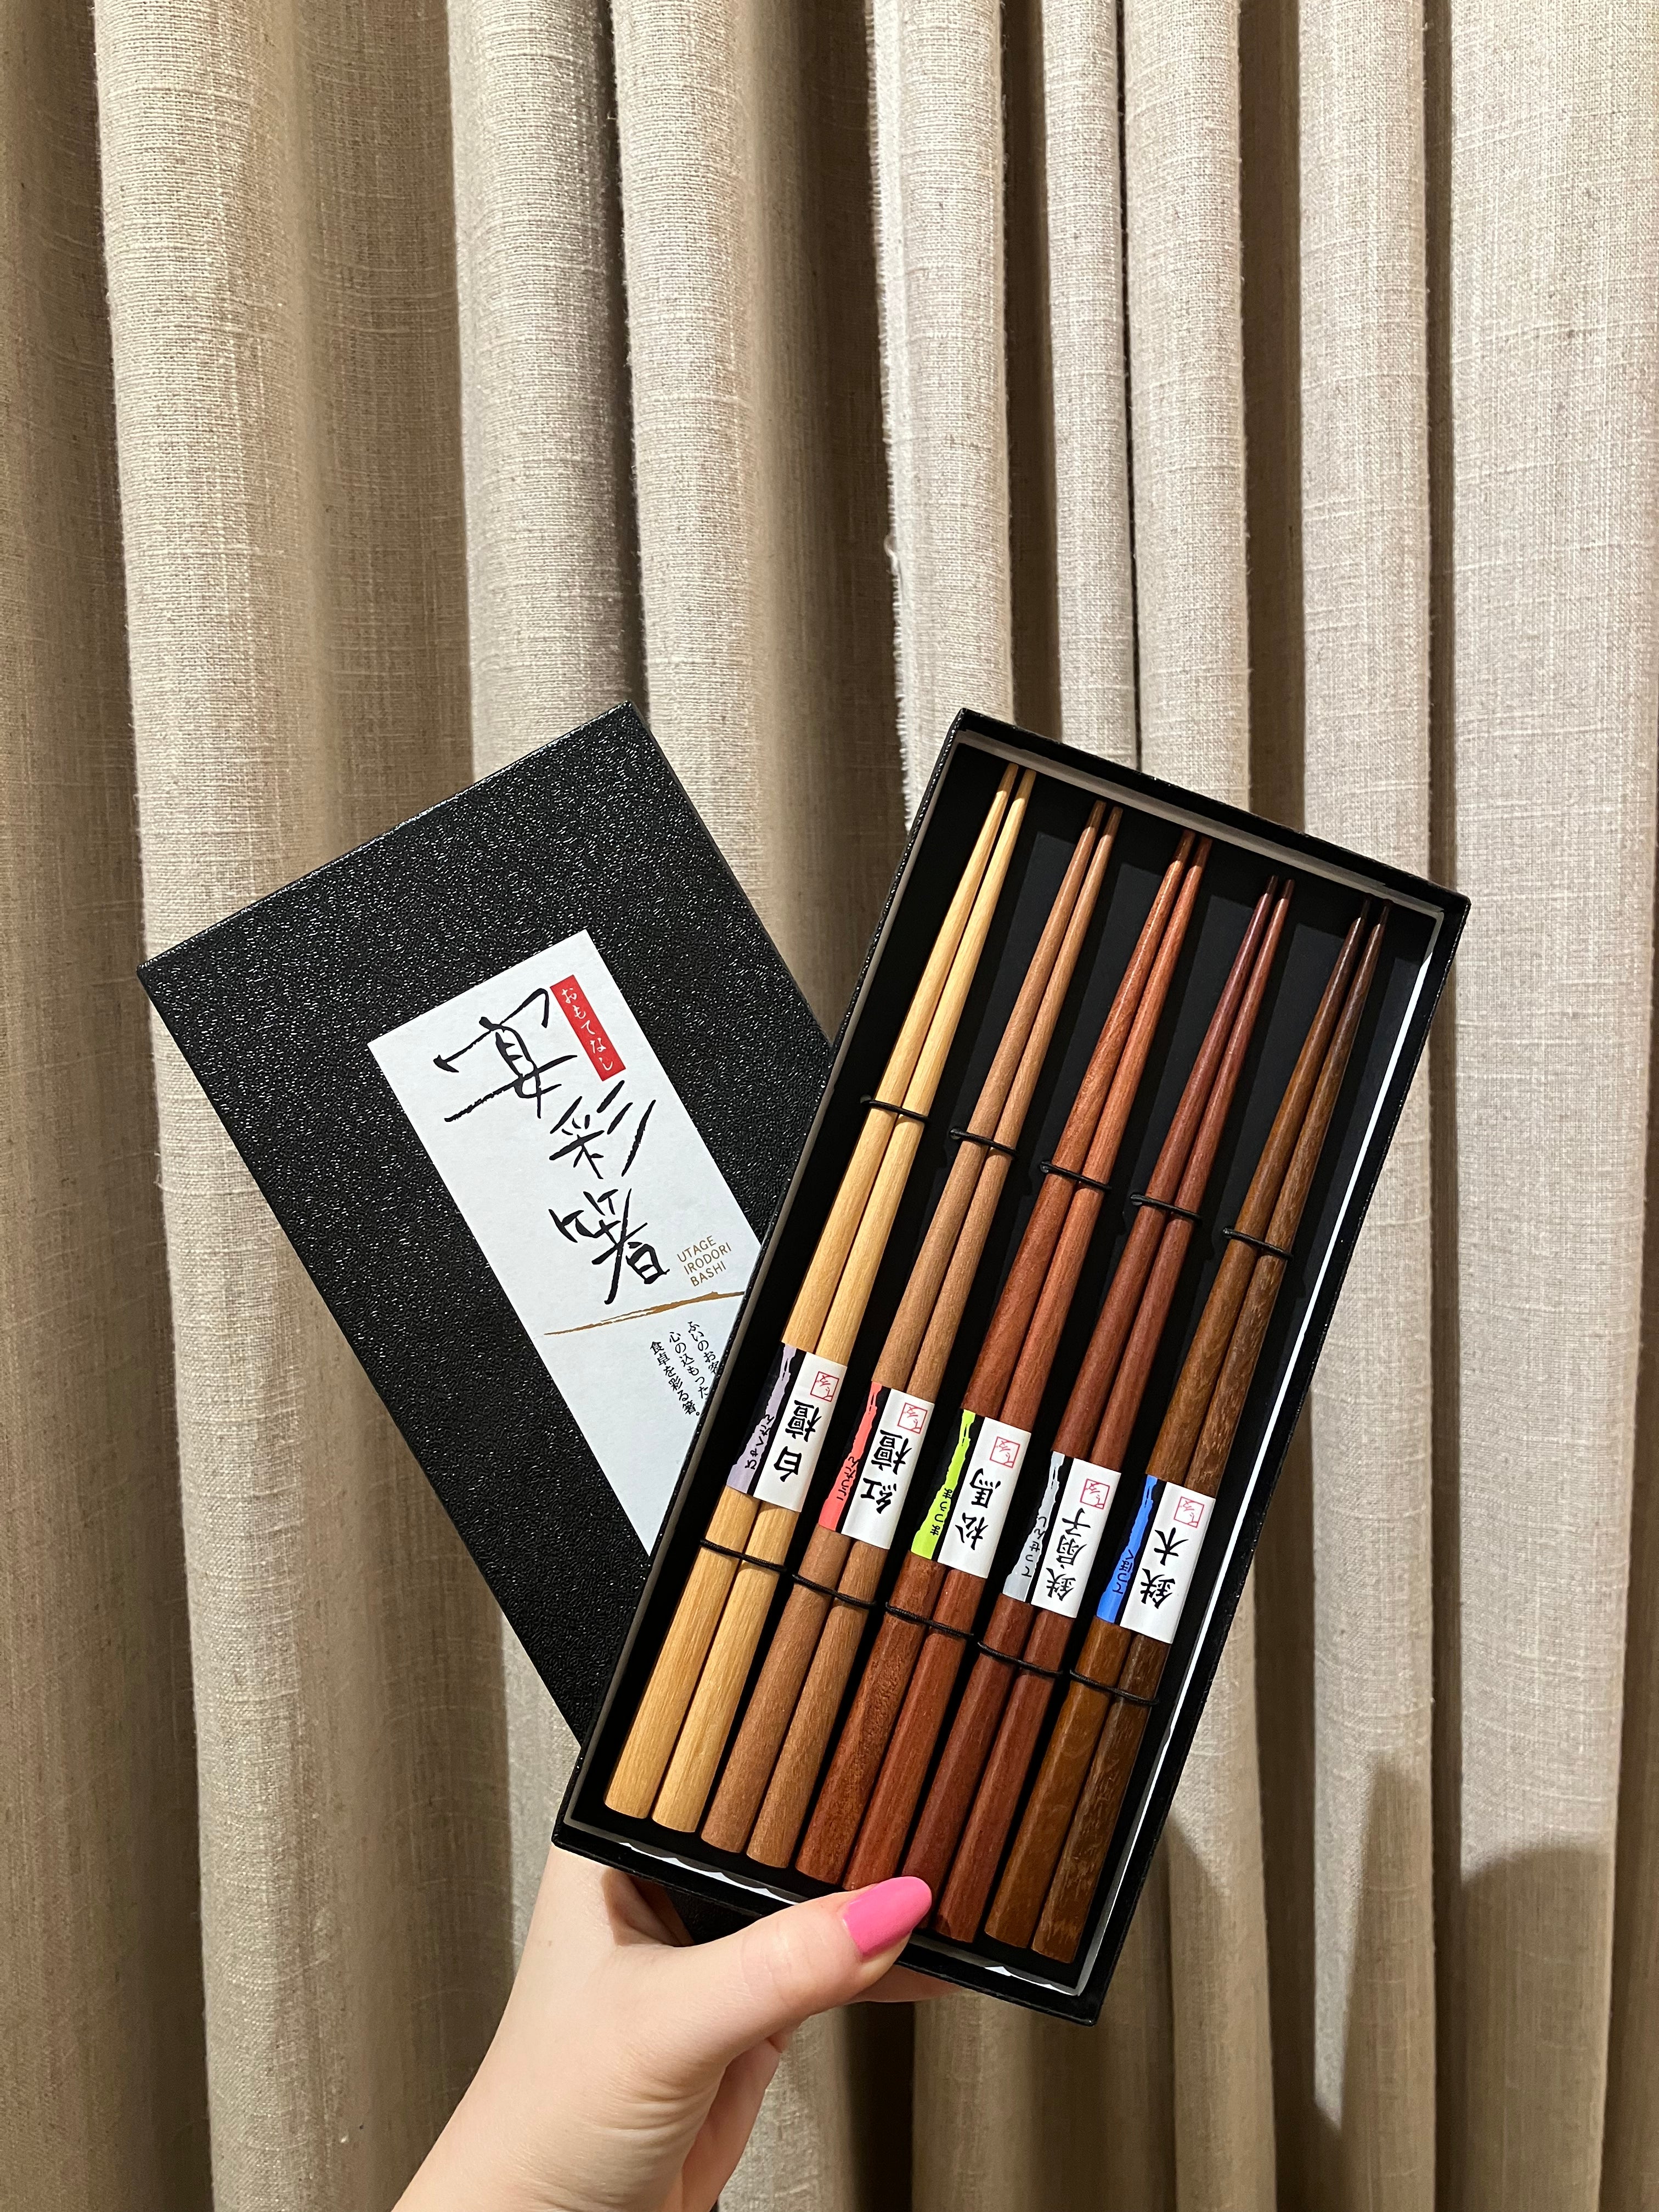 Chopsticks in different shades of wood